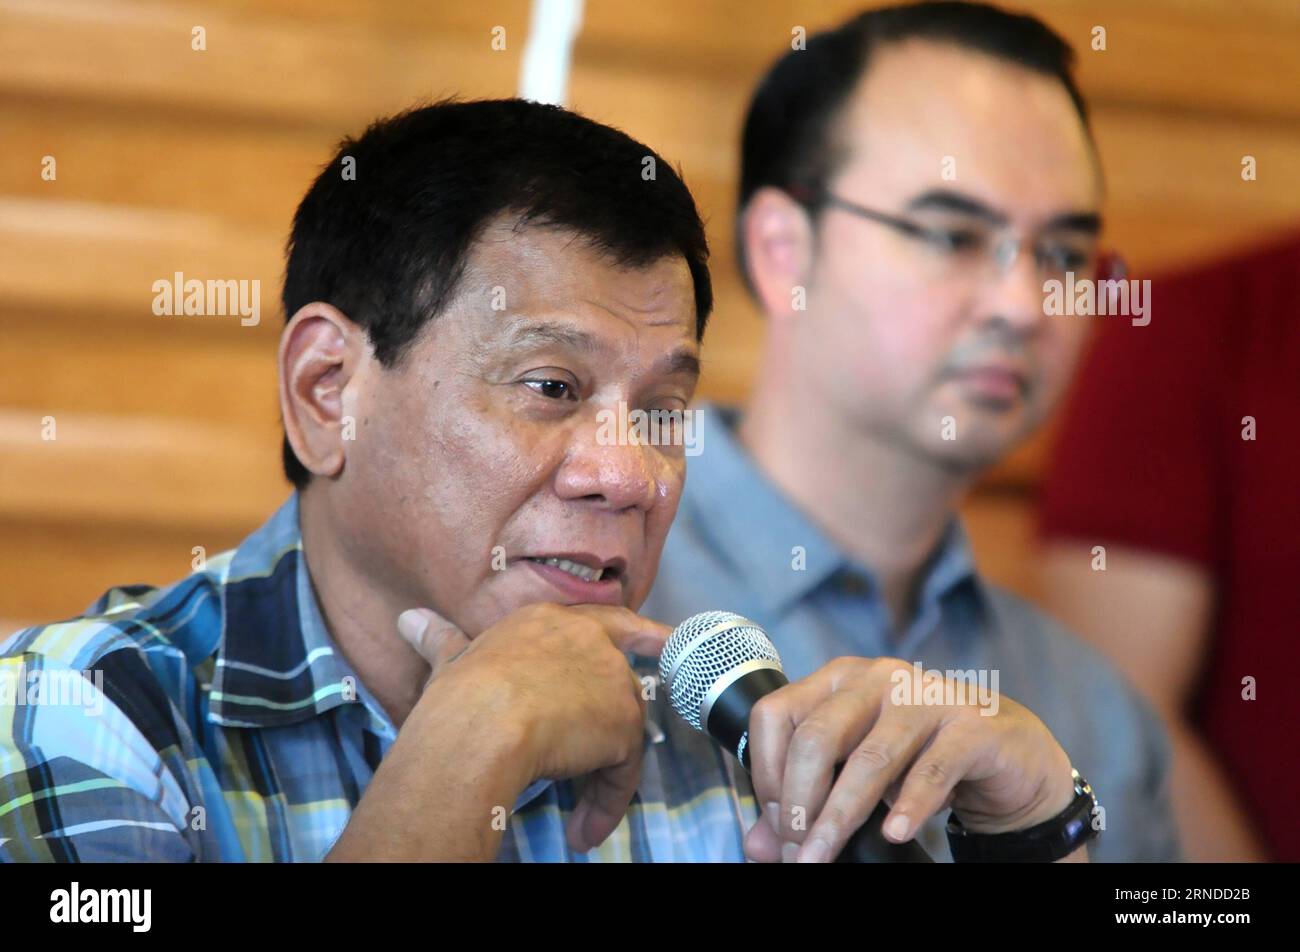 (160516) -- DAVAO PROVINCE, May 16, 2016 -- Presumptive Philippine president-elect Rodrigo Duterte speaks during a press conference in Davao Province, the Philippines, May 16, 2016. Presumptive Philippine president-elect Rodrigo Duterte vowed to restore death penalty in his country, according to his speech on Monday. ) PHILIPPINES-DAVAO PROVINCE-DUTERTE-PRESS CONFERENCE Stringer PUBLICATIONxNOTxINxCHN   160516 Davao Province May 16 2016 presumptive Philippine President elect Rodrigo Duterte Speaks during a Press Conference in Davao Province The Philippines May 16 2016 presumptive Philippine Pr Stock Photo